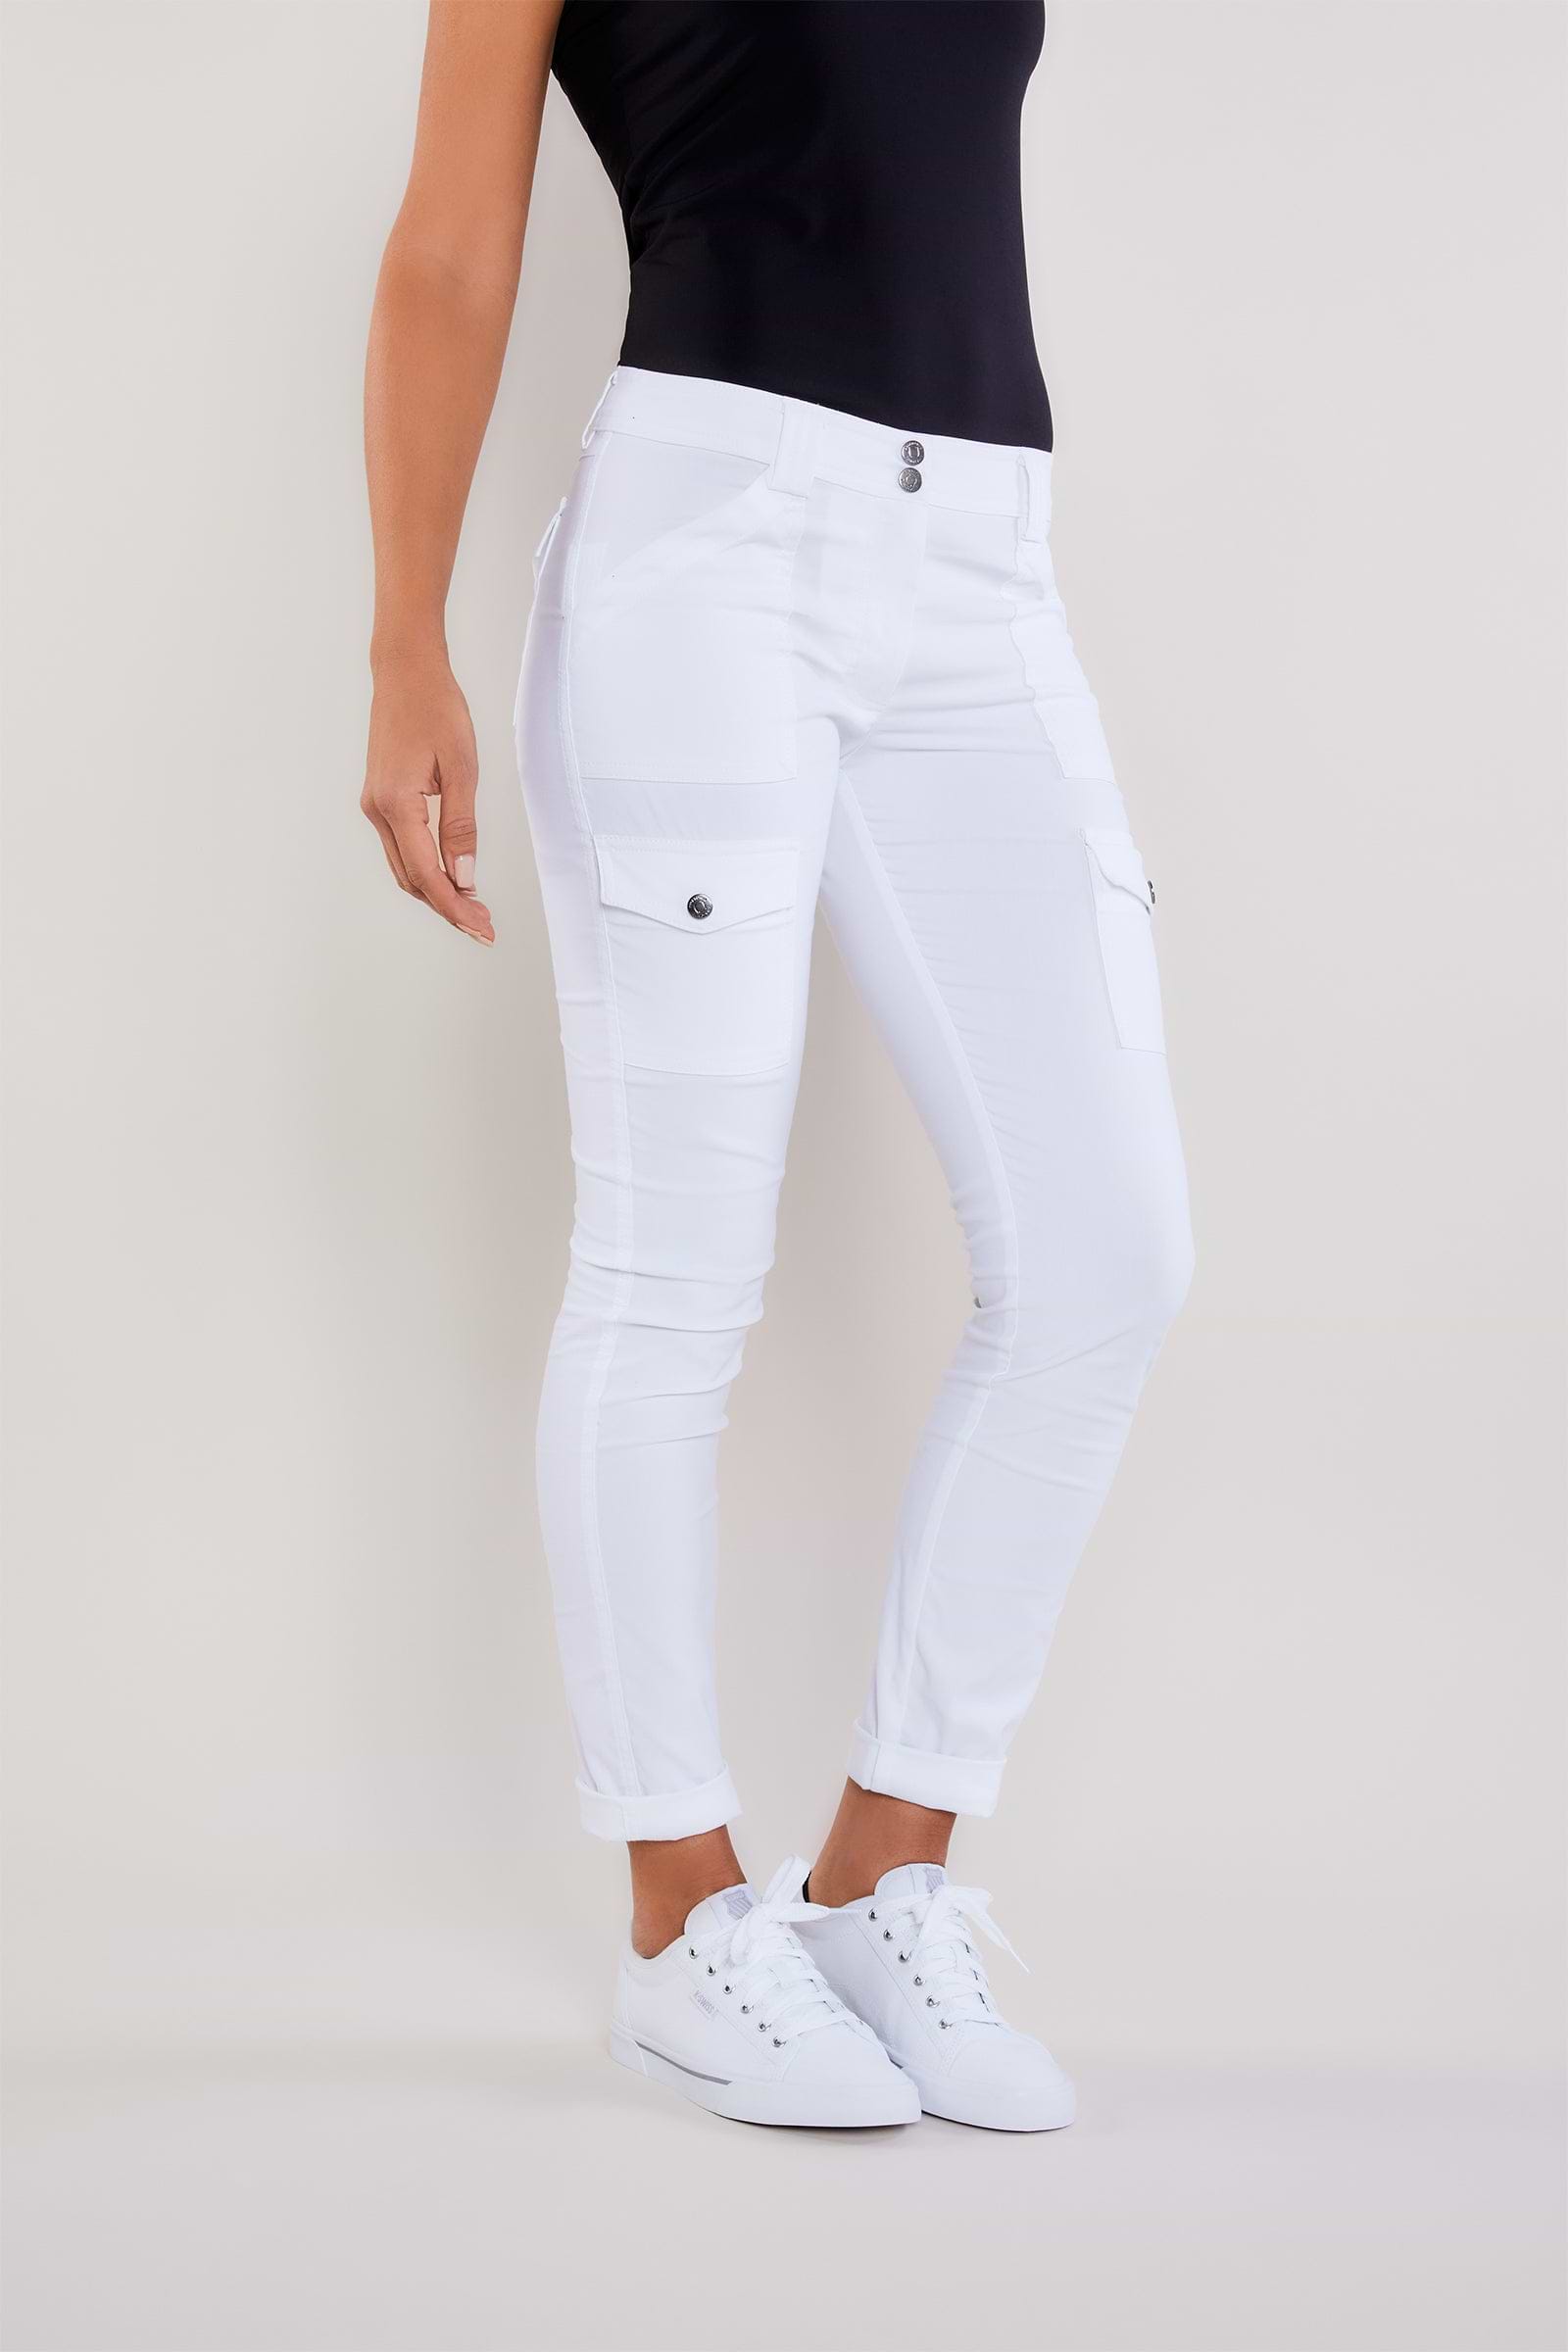 The Best Travel Cargo Pants. Side Profile of the Kate Skinny Cargo Pant in White